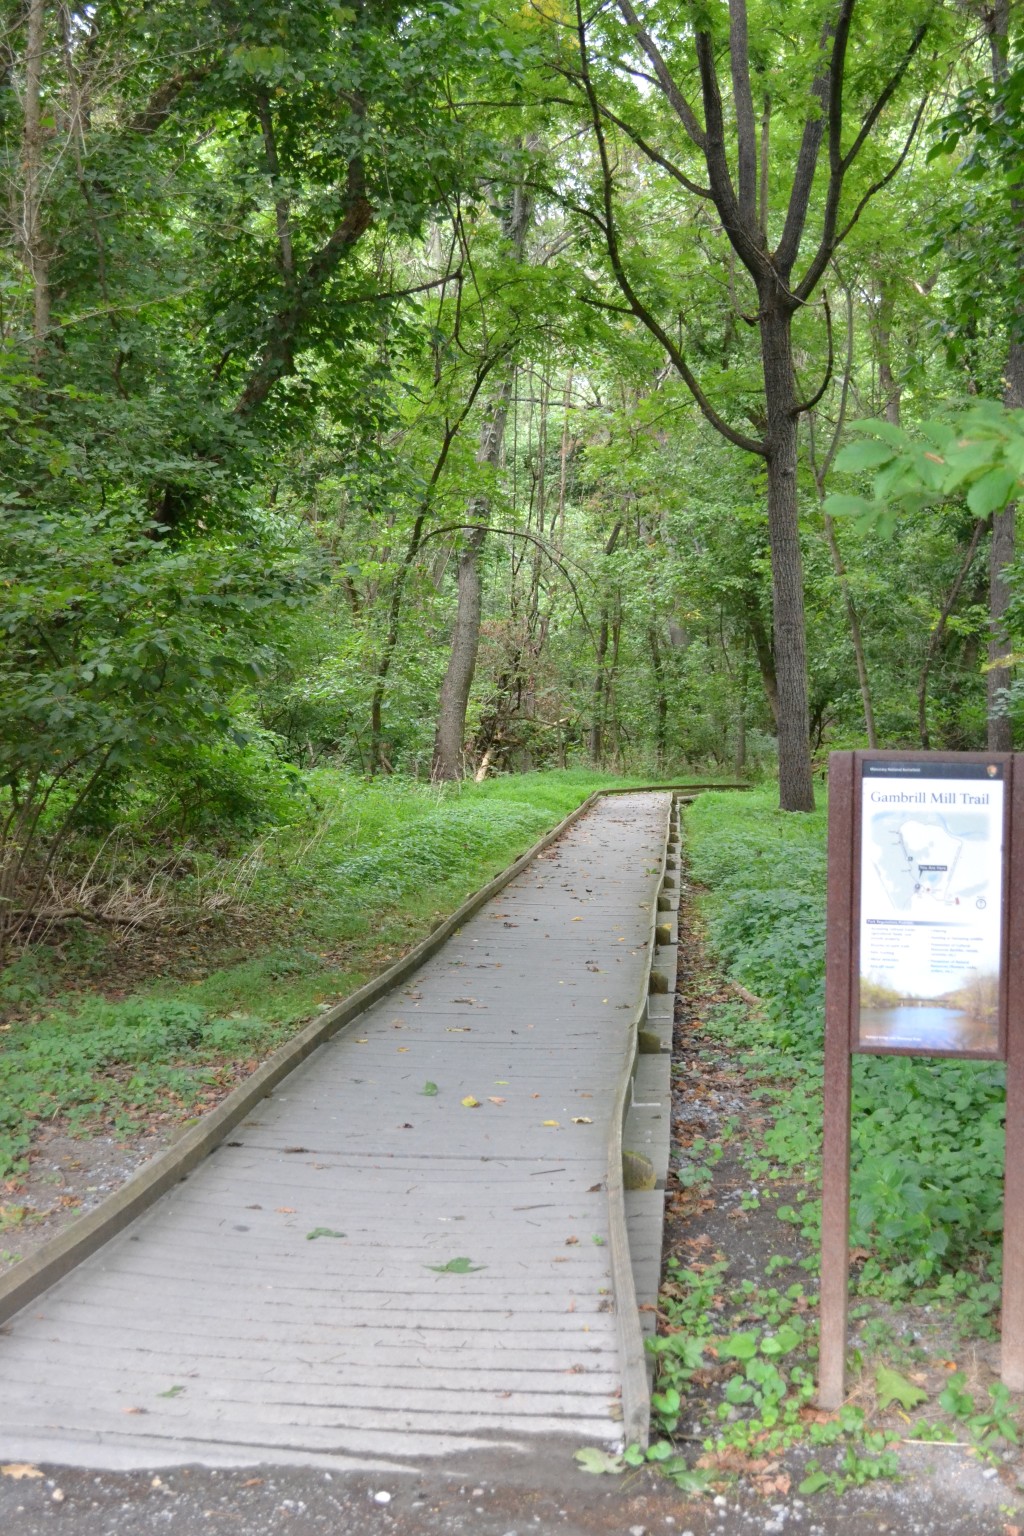 The National Park Service has created a very pleasant, walkable path through the wood, along the stream to a view of the railroad bridge where the Battle of the Monocacy took place.